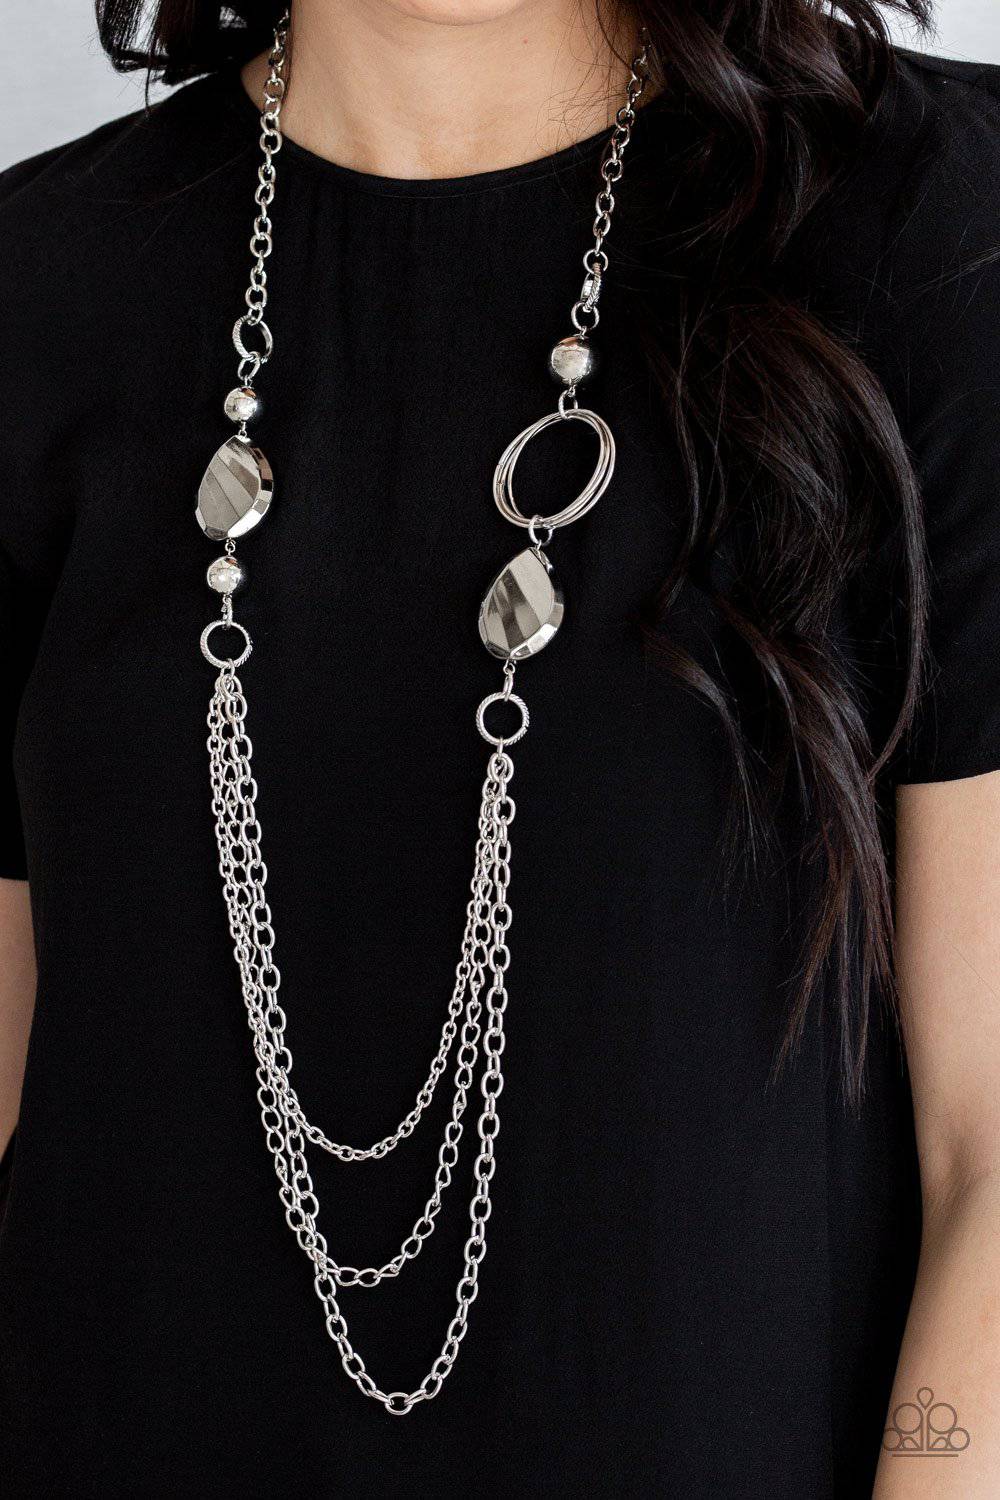 Rebels Have More Fun - Silver Necklace - Paparazzi Accessories - GlaMarous Titi Jewels